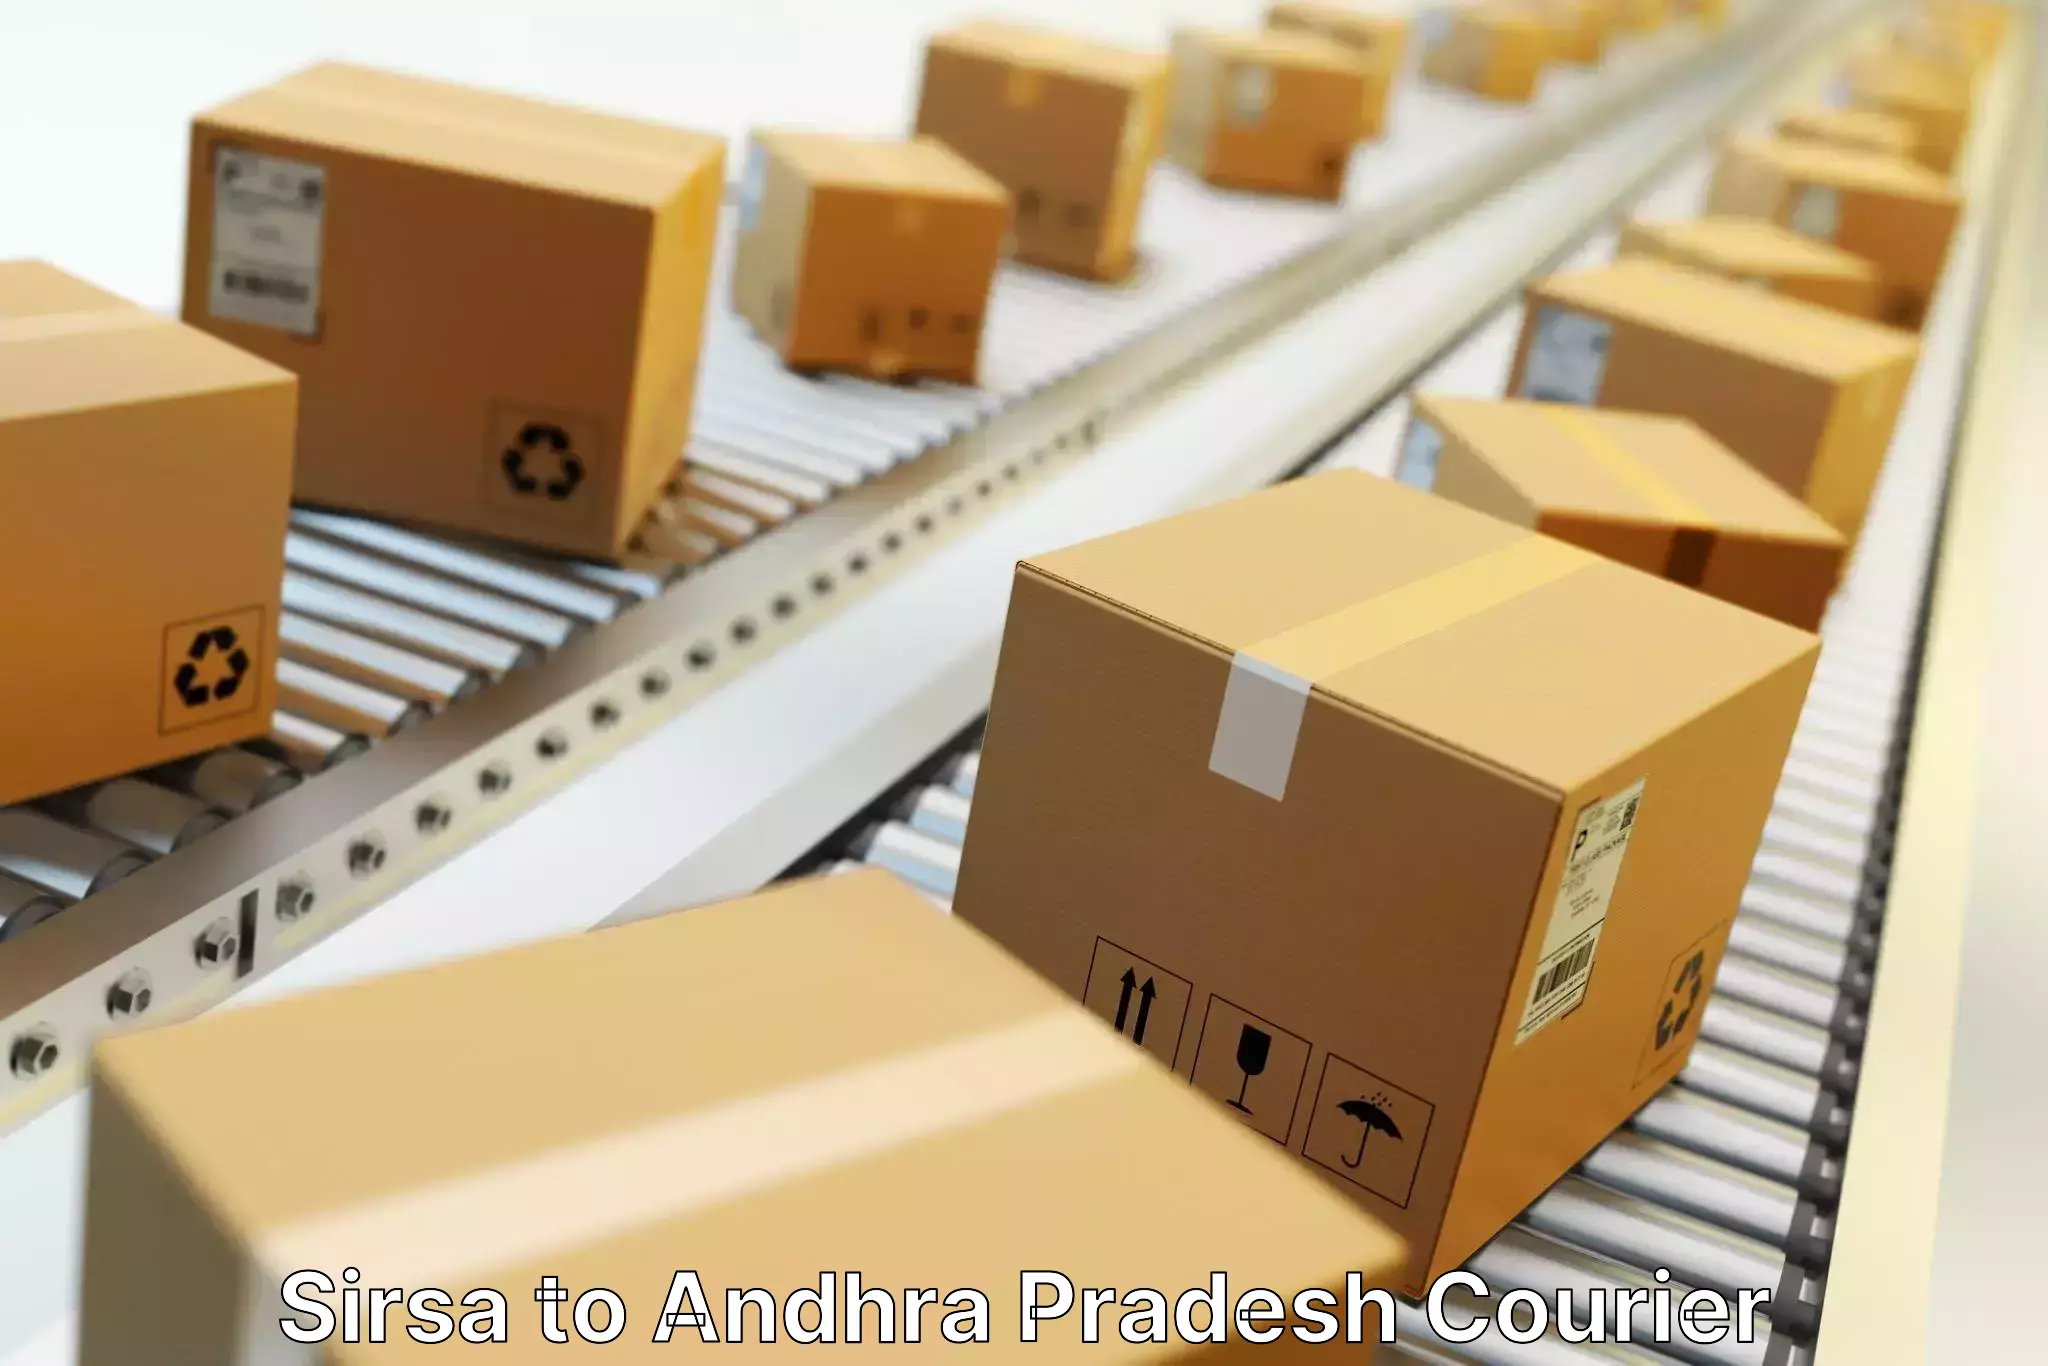 Fast delivery service Sirsa to Andhra Pradesh